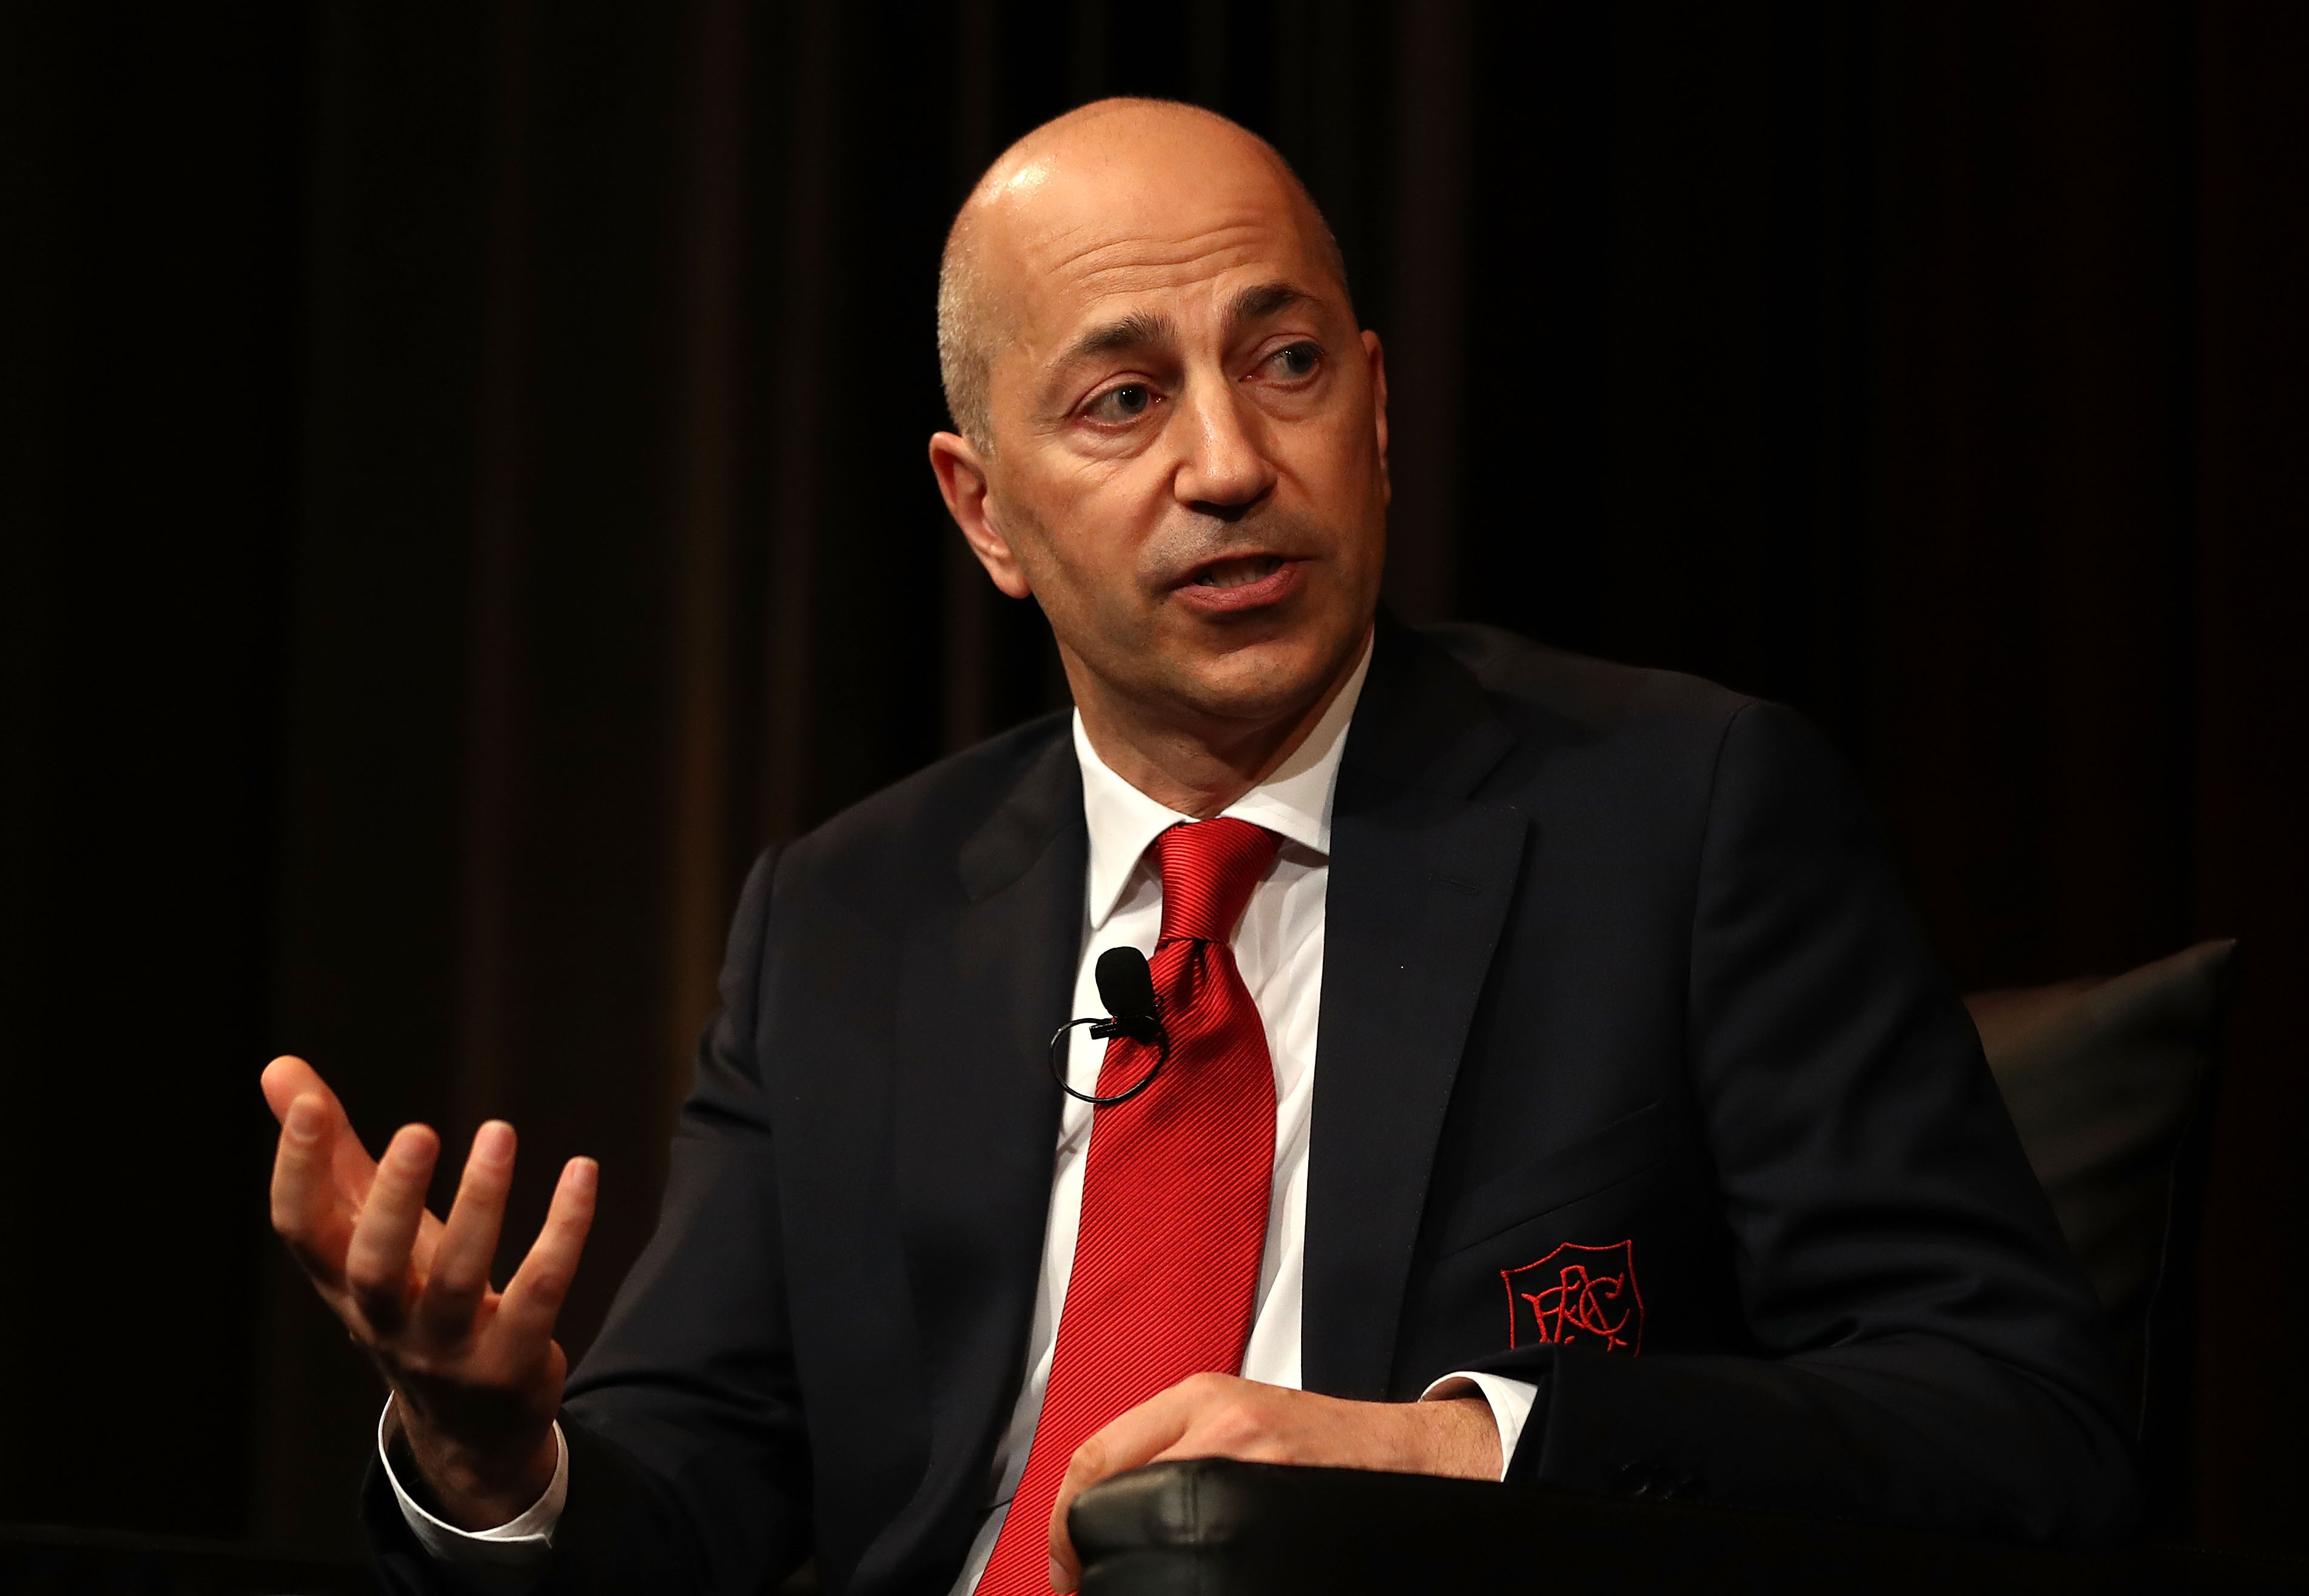 Watch: Gazidis speaks for the first time as AC CEO